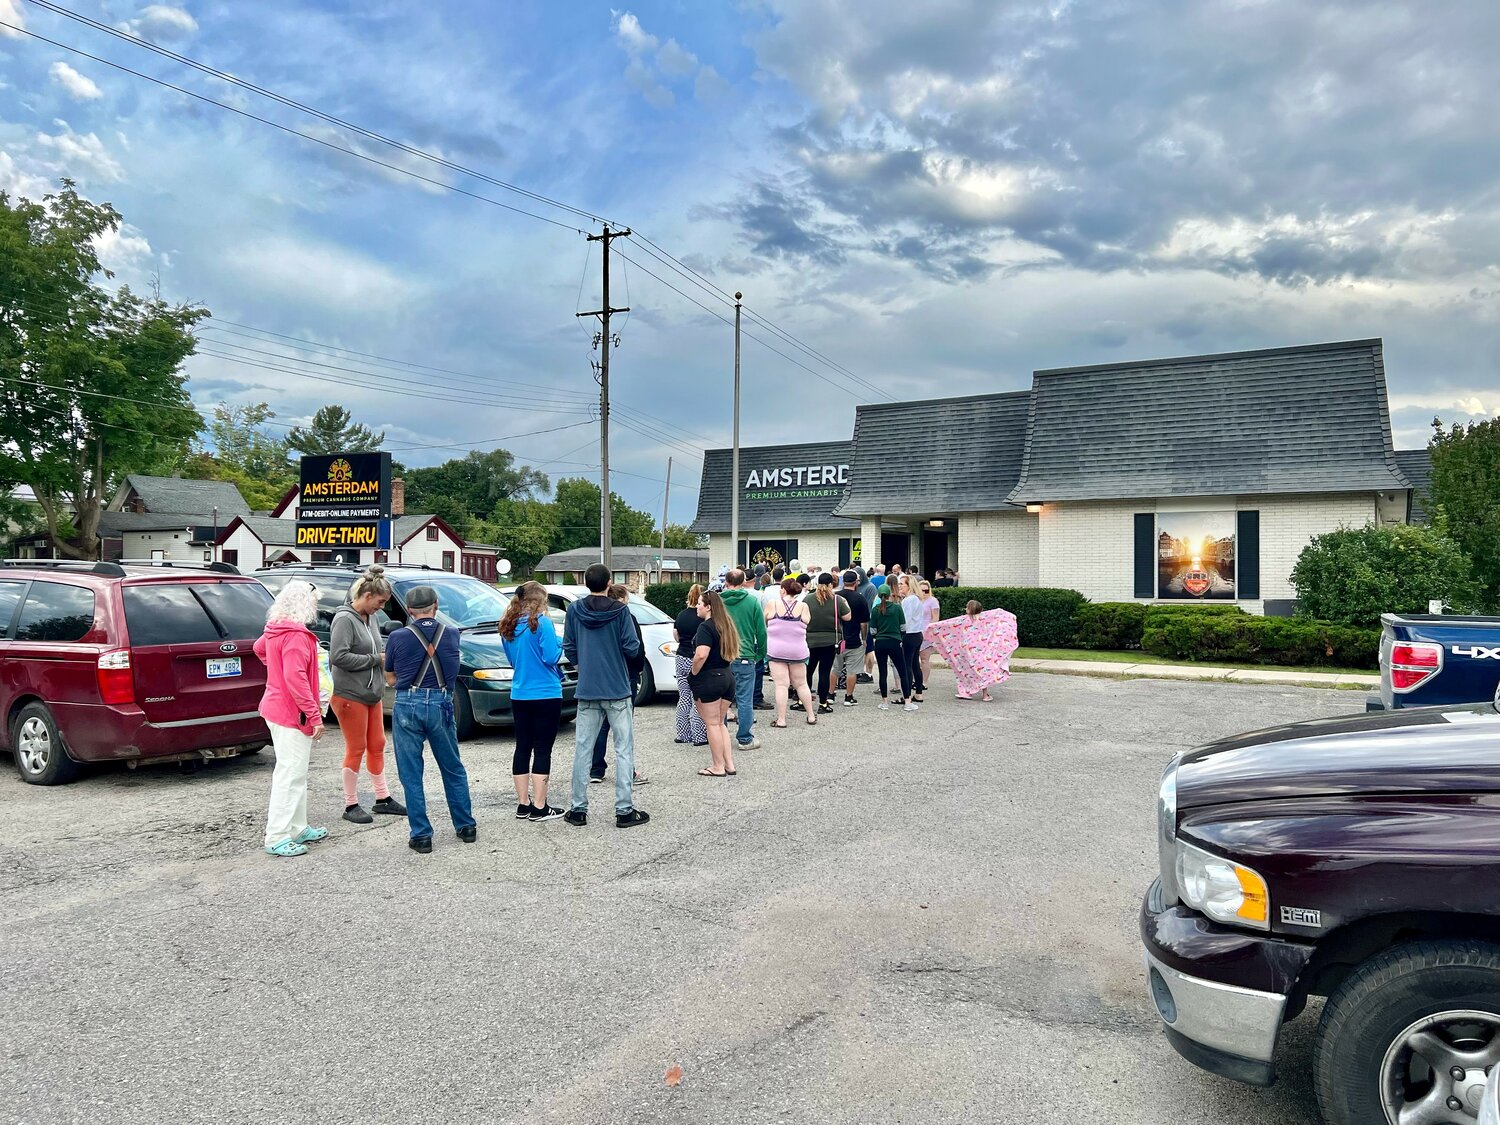    Over 50 people joined Amsterdam Premium Cannabis Company and the Harrison Chamber of Commerce for the ribbon cutting for Amsterdam’s official grand opening on Saturday, Sept. 2.